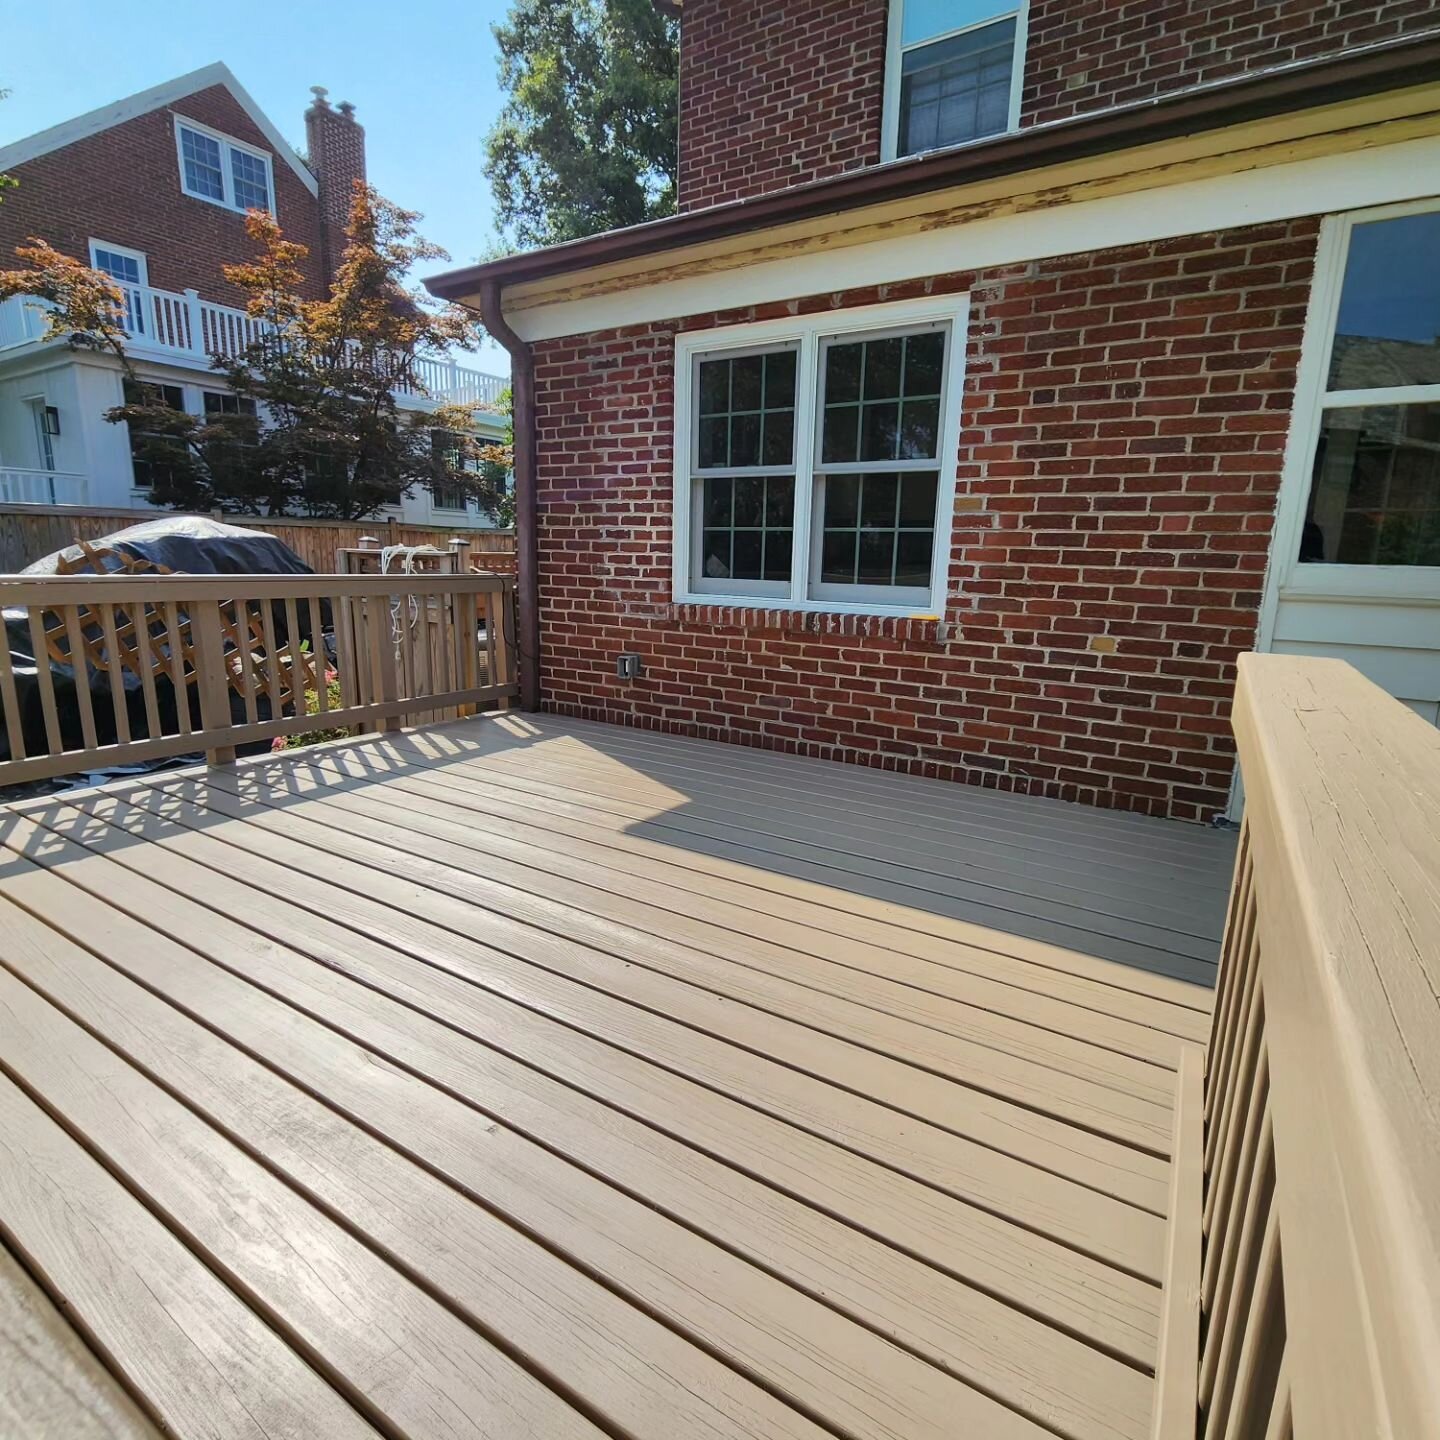 Deck Refinish
Get your deck Refinished today